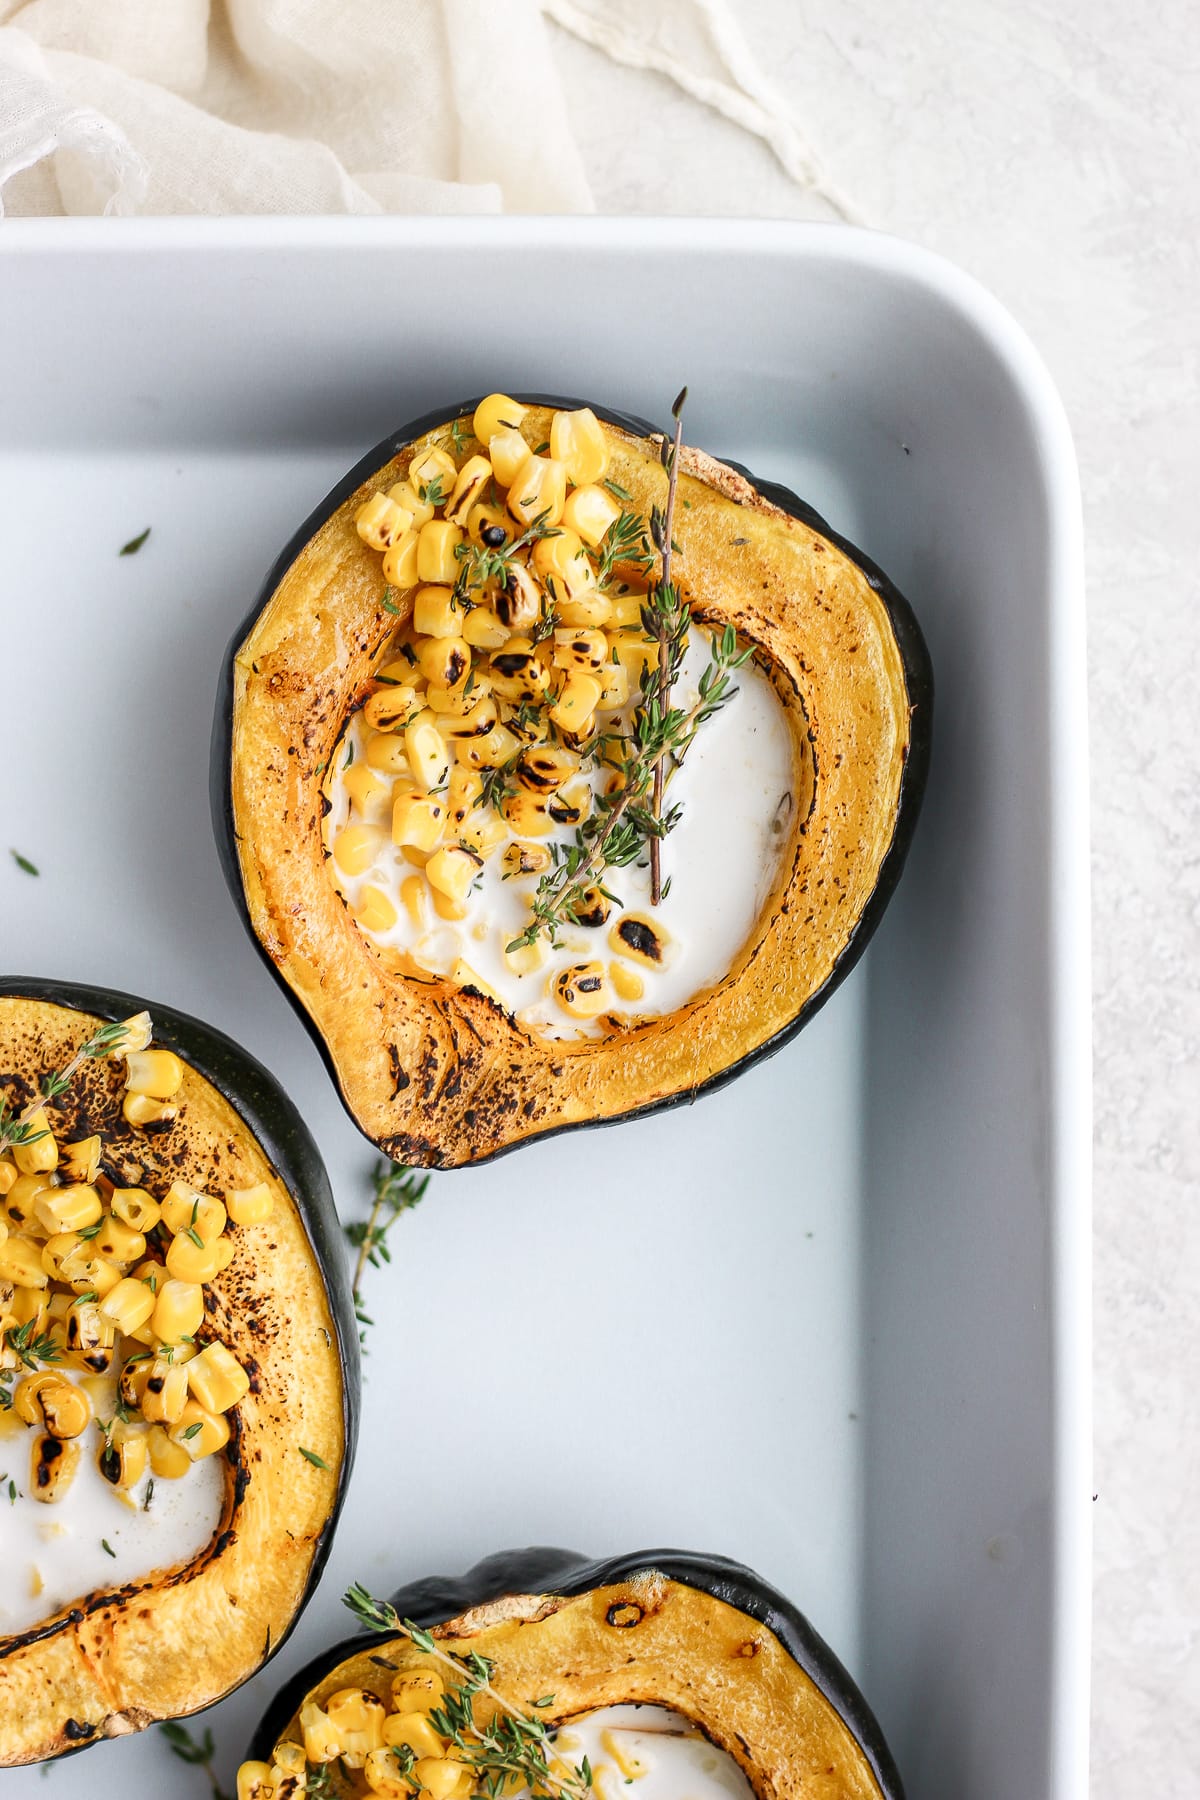 Baked Creamy Acorn Squash - a creamy and delicious side dish that is dairy-free, vegan and gluten-free! #acornsquash #dairyfreerecipes #dairyfree #vegan #plantbased #creamedcorn #foodphotography #christmasdinner #thanksgiving